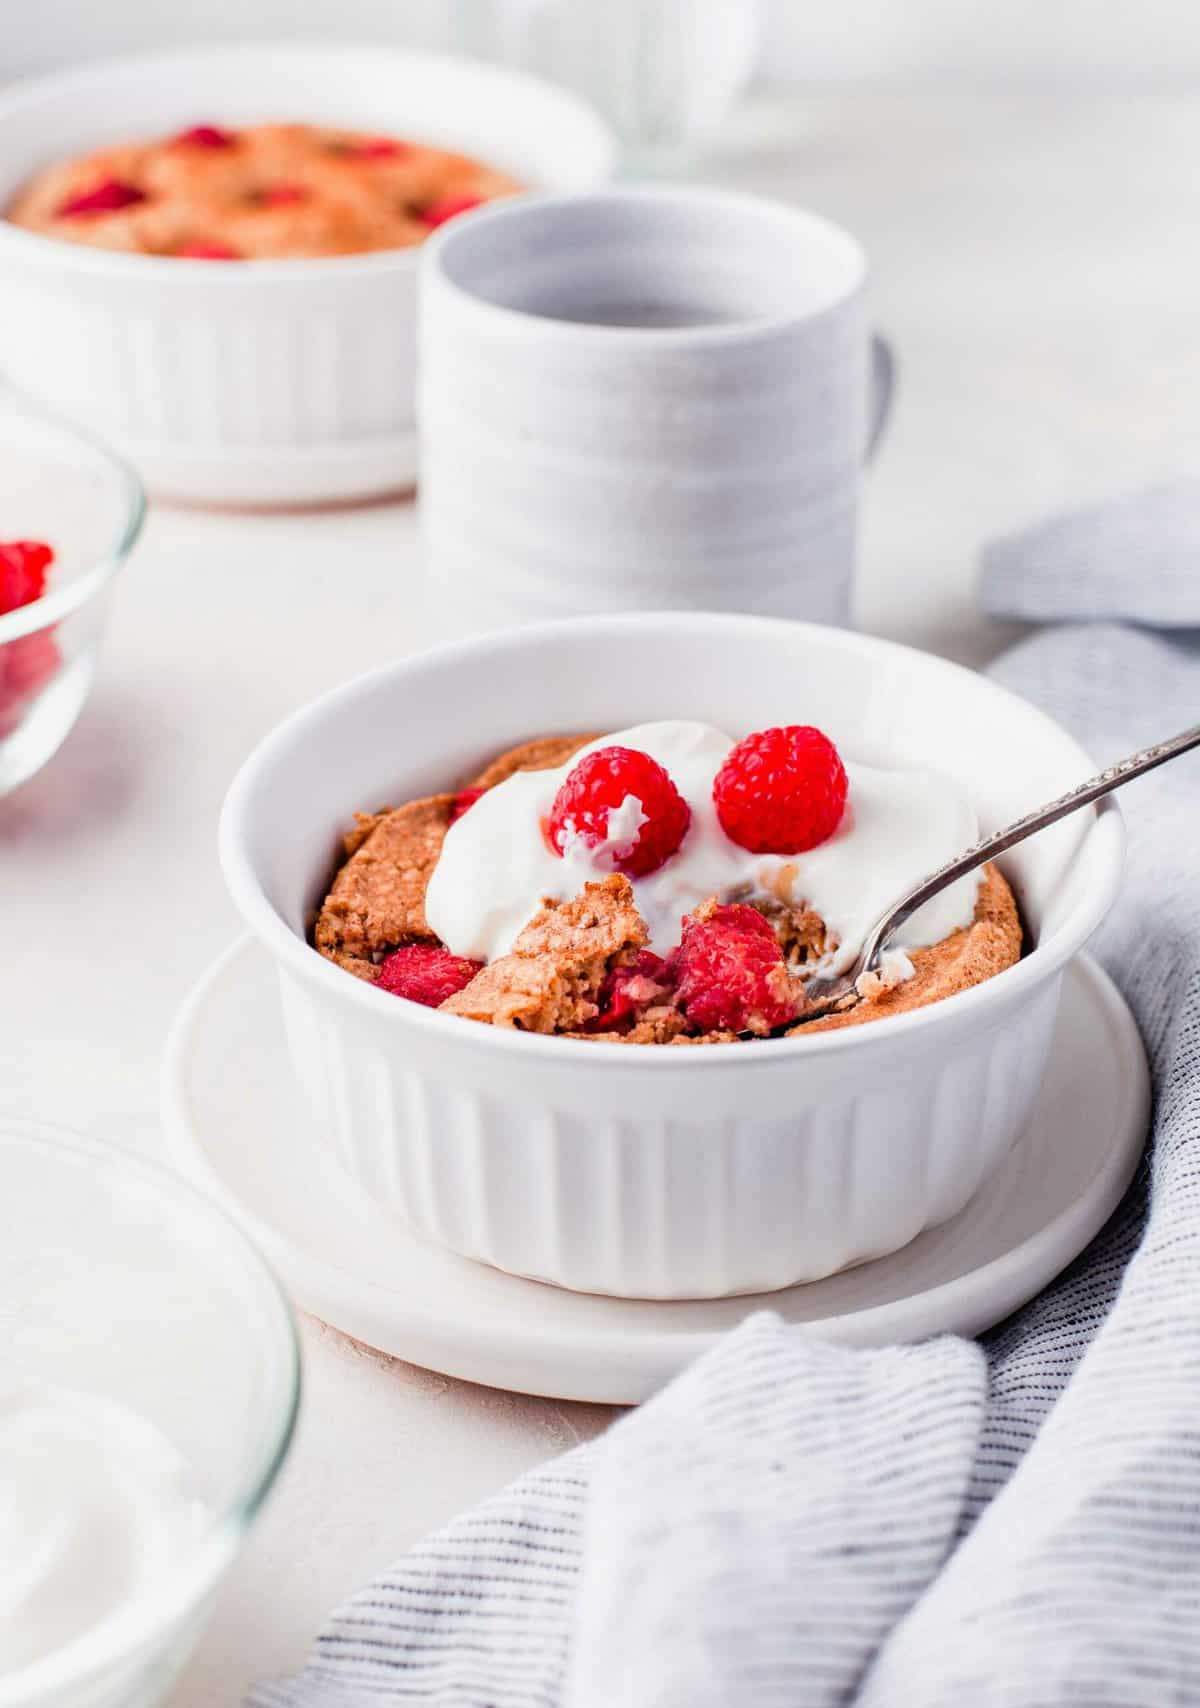 Raspberry baked oatmeal in white bowl with spoon, topped with yogurt and raspberries